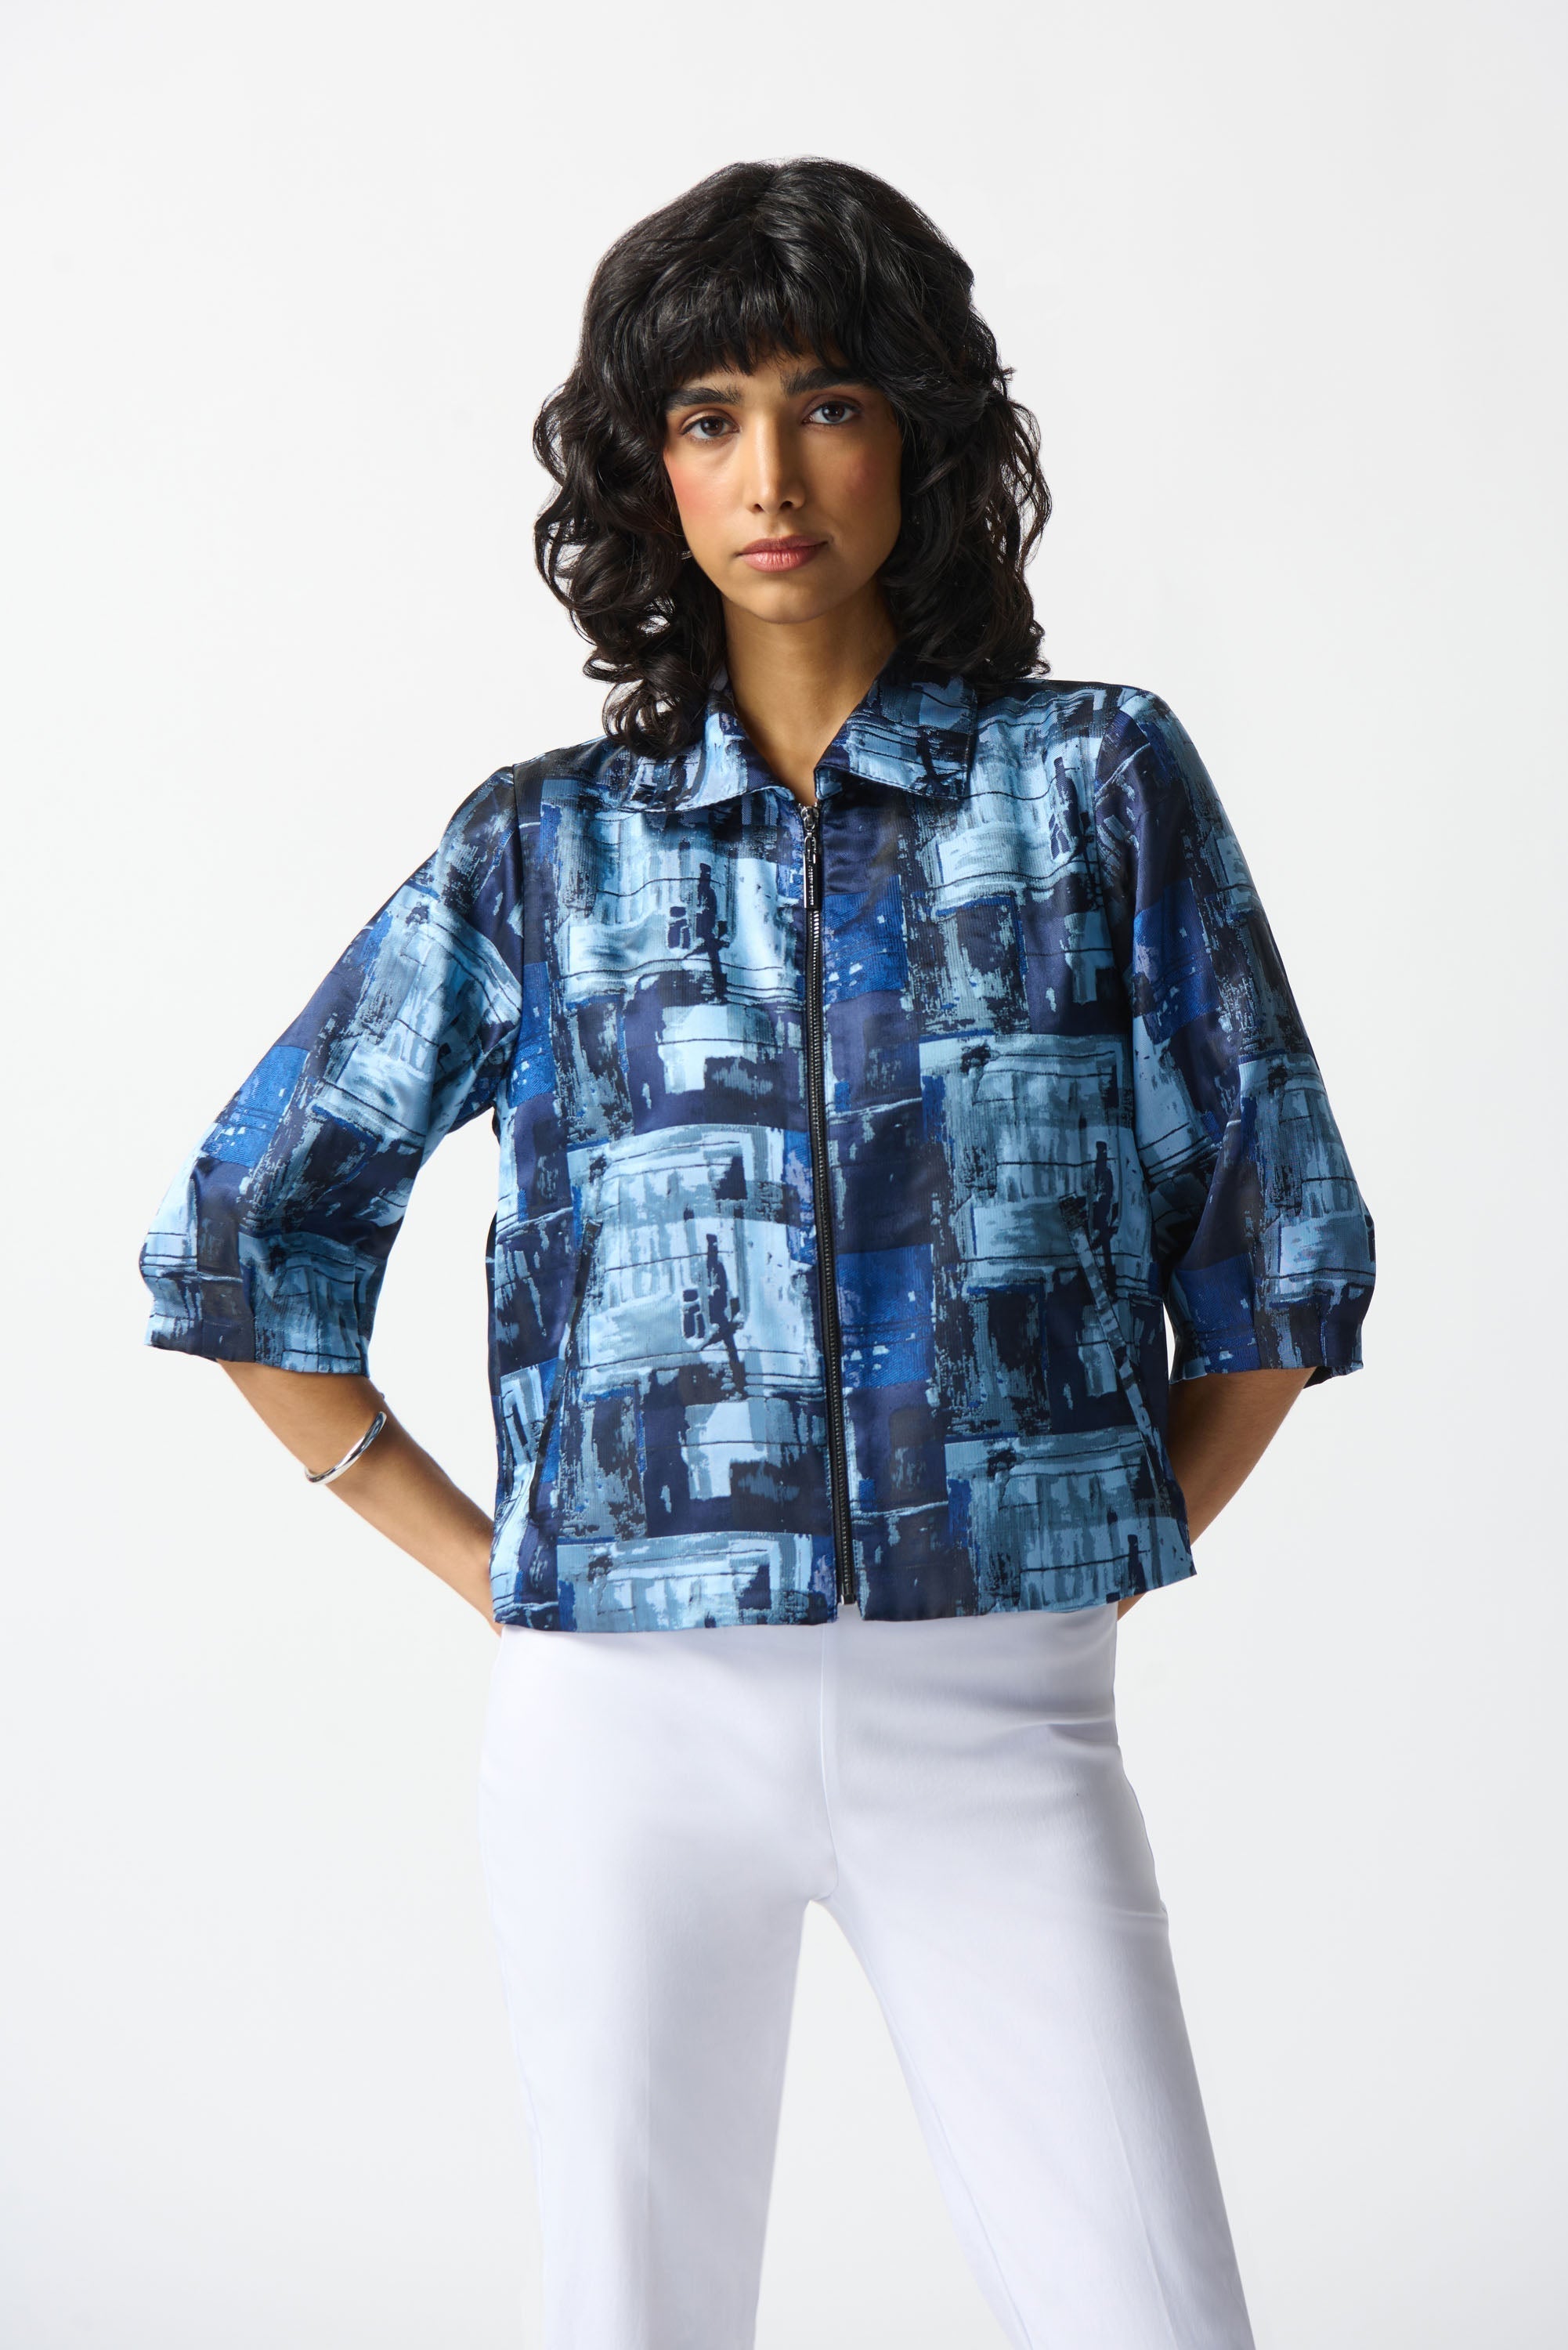 Joseph Ribkoff (242105) Women's 3/4 Sleeve Zipp up Woven Jacquard Abstract Boxy Jacket with Shirt Collar and Welt Pockets in a monochromatic blue abstract print